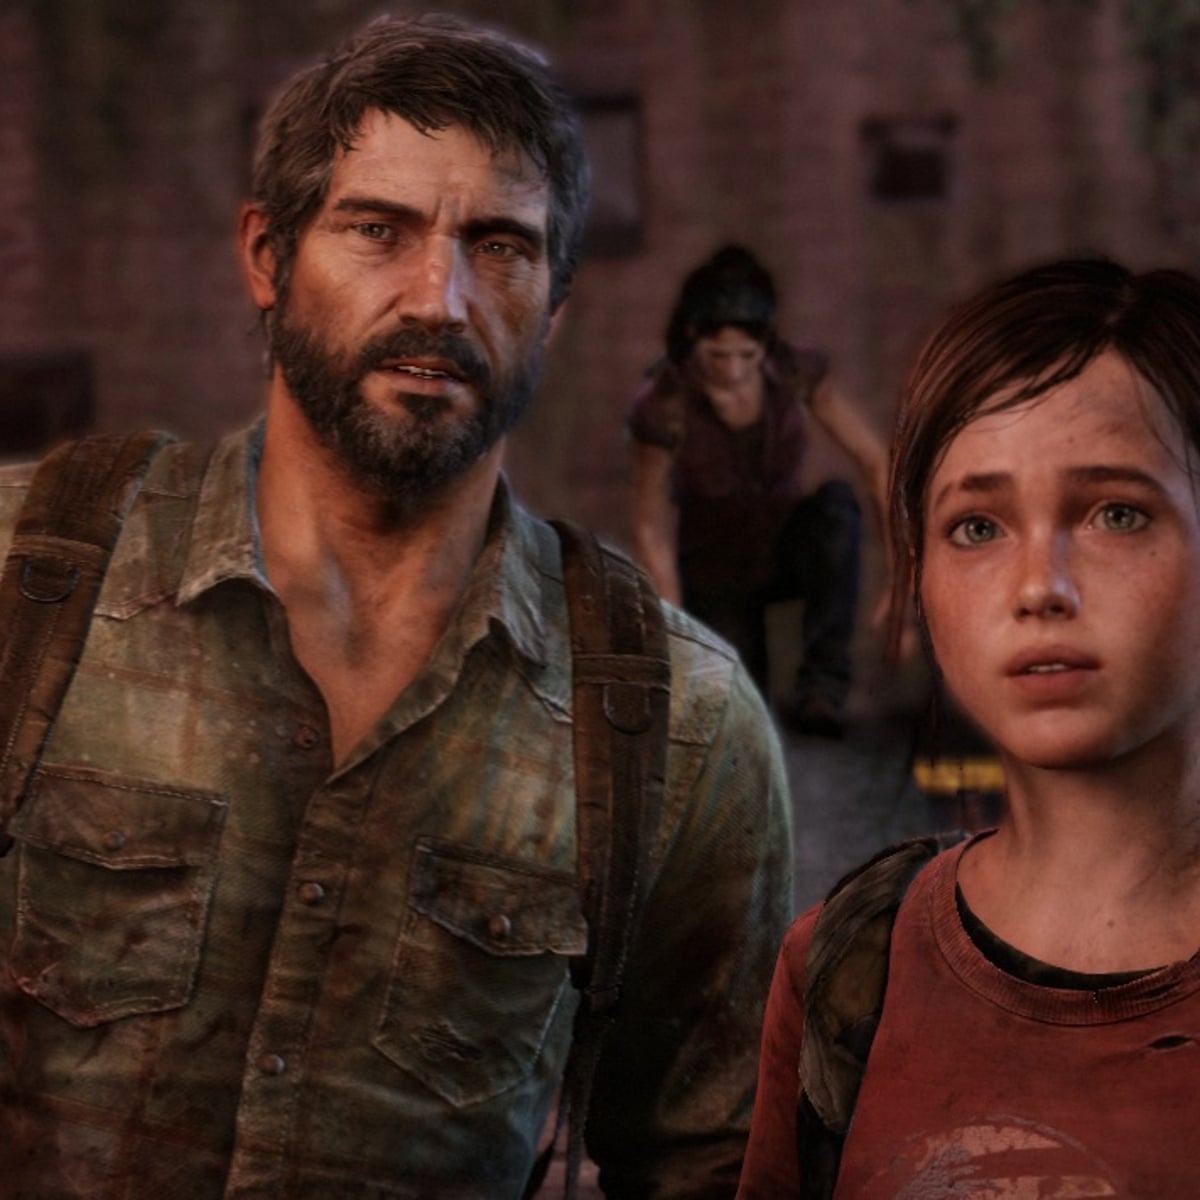 Now that I've finally played The Last of Us, who wants to talk